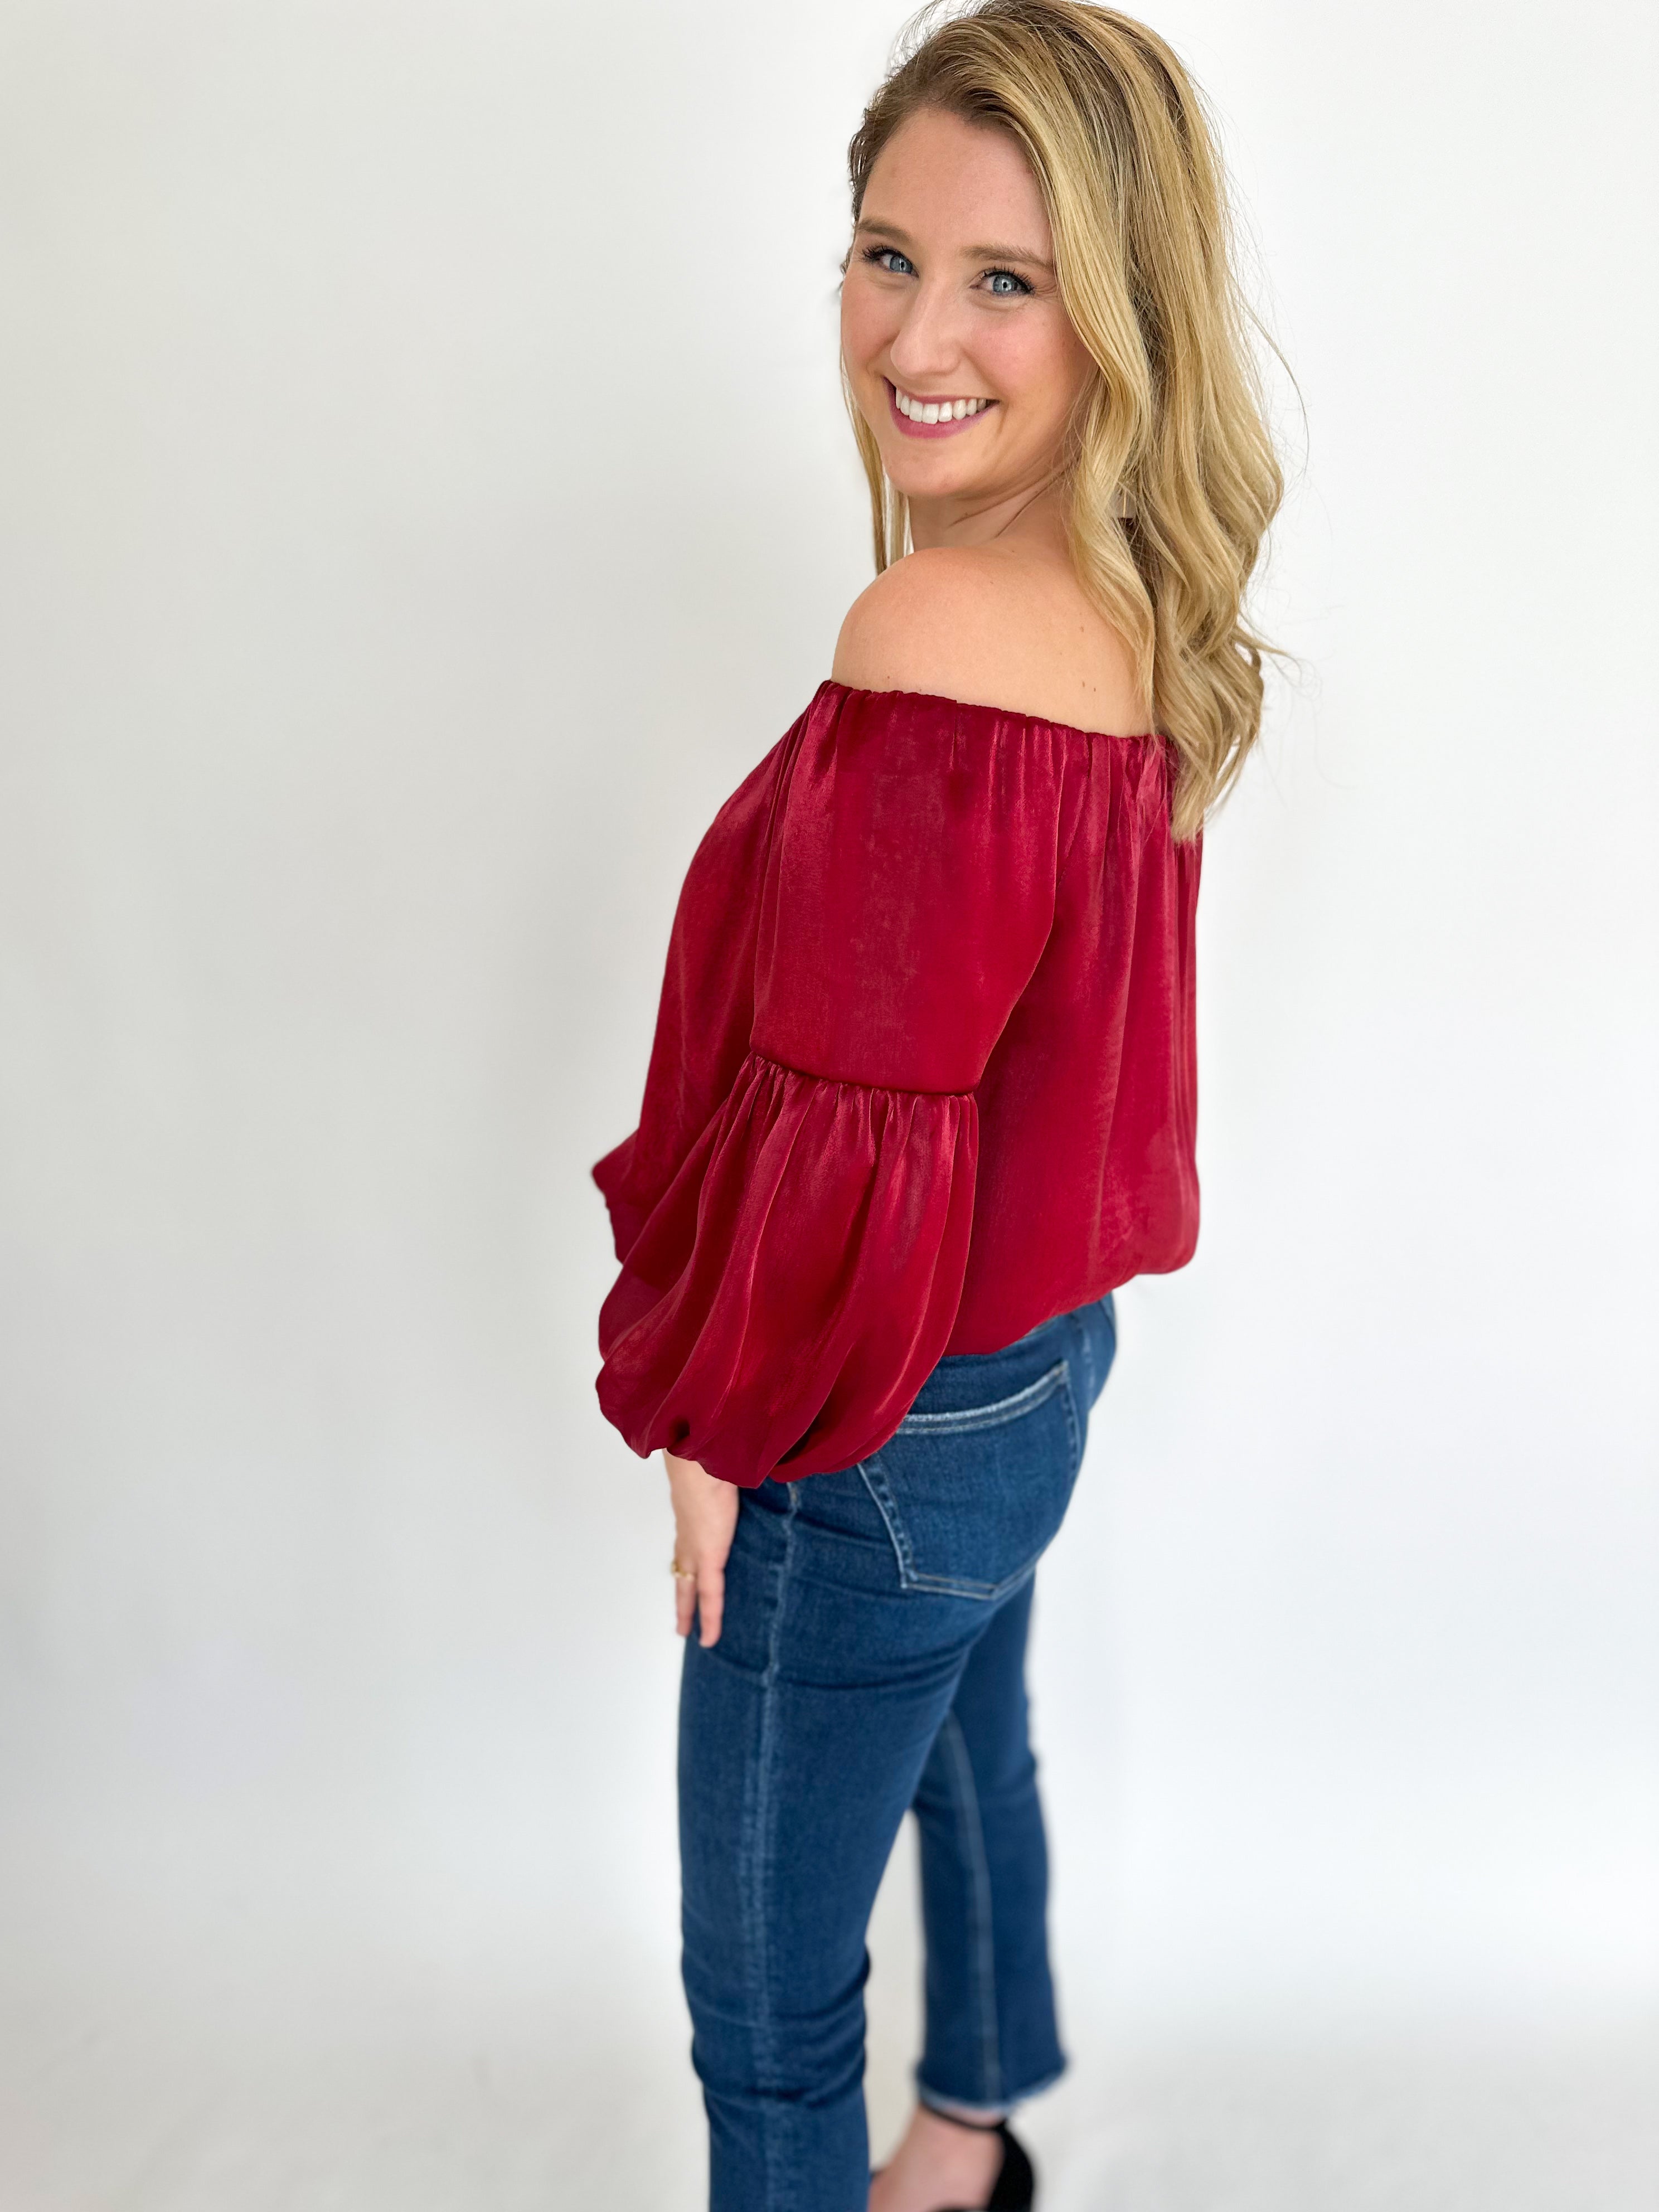 Very Merry Off The Shoulder Blouse-200 Fashion Blouses-FLYING TOMATO-July & June Women's Fashion Boutique Located in San Antonio, Texas